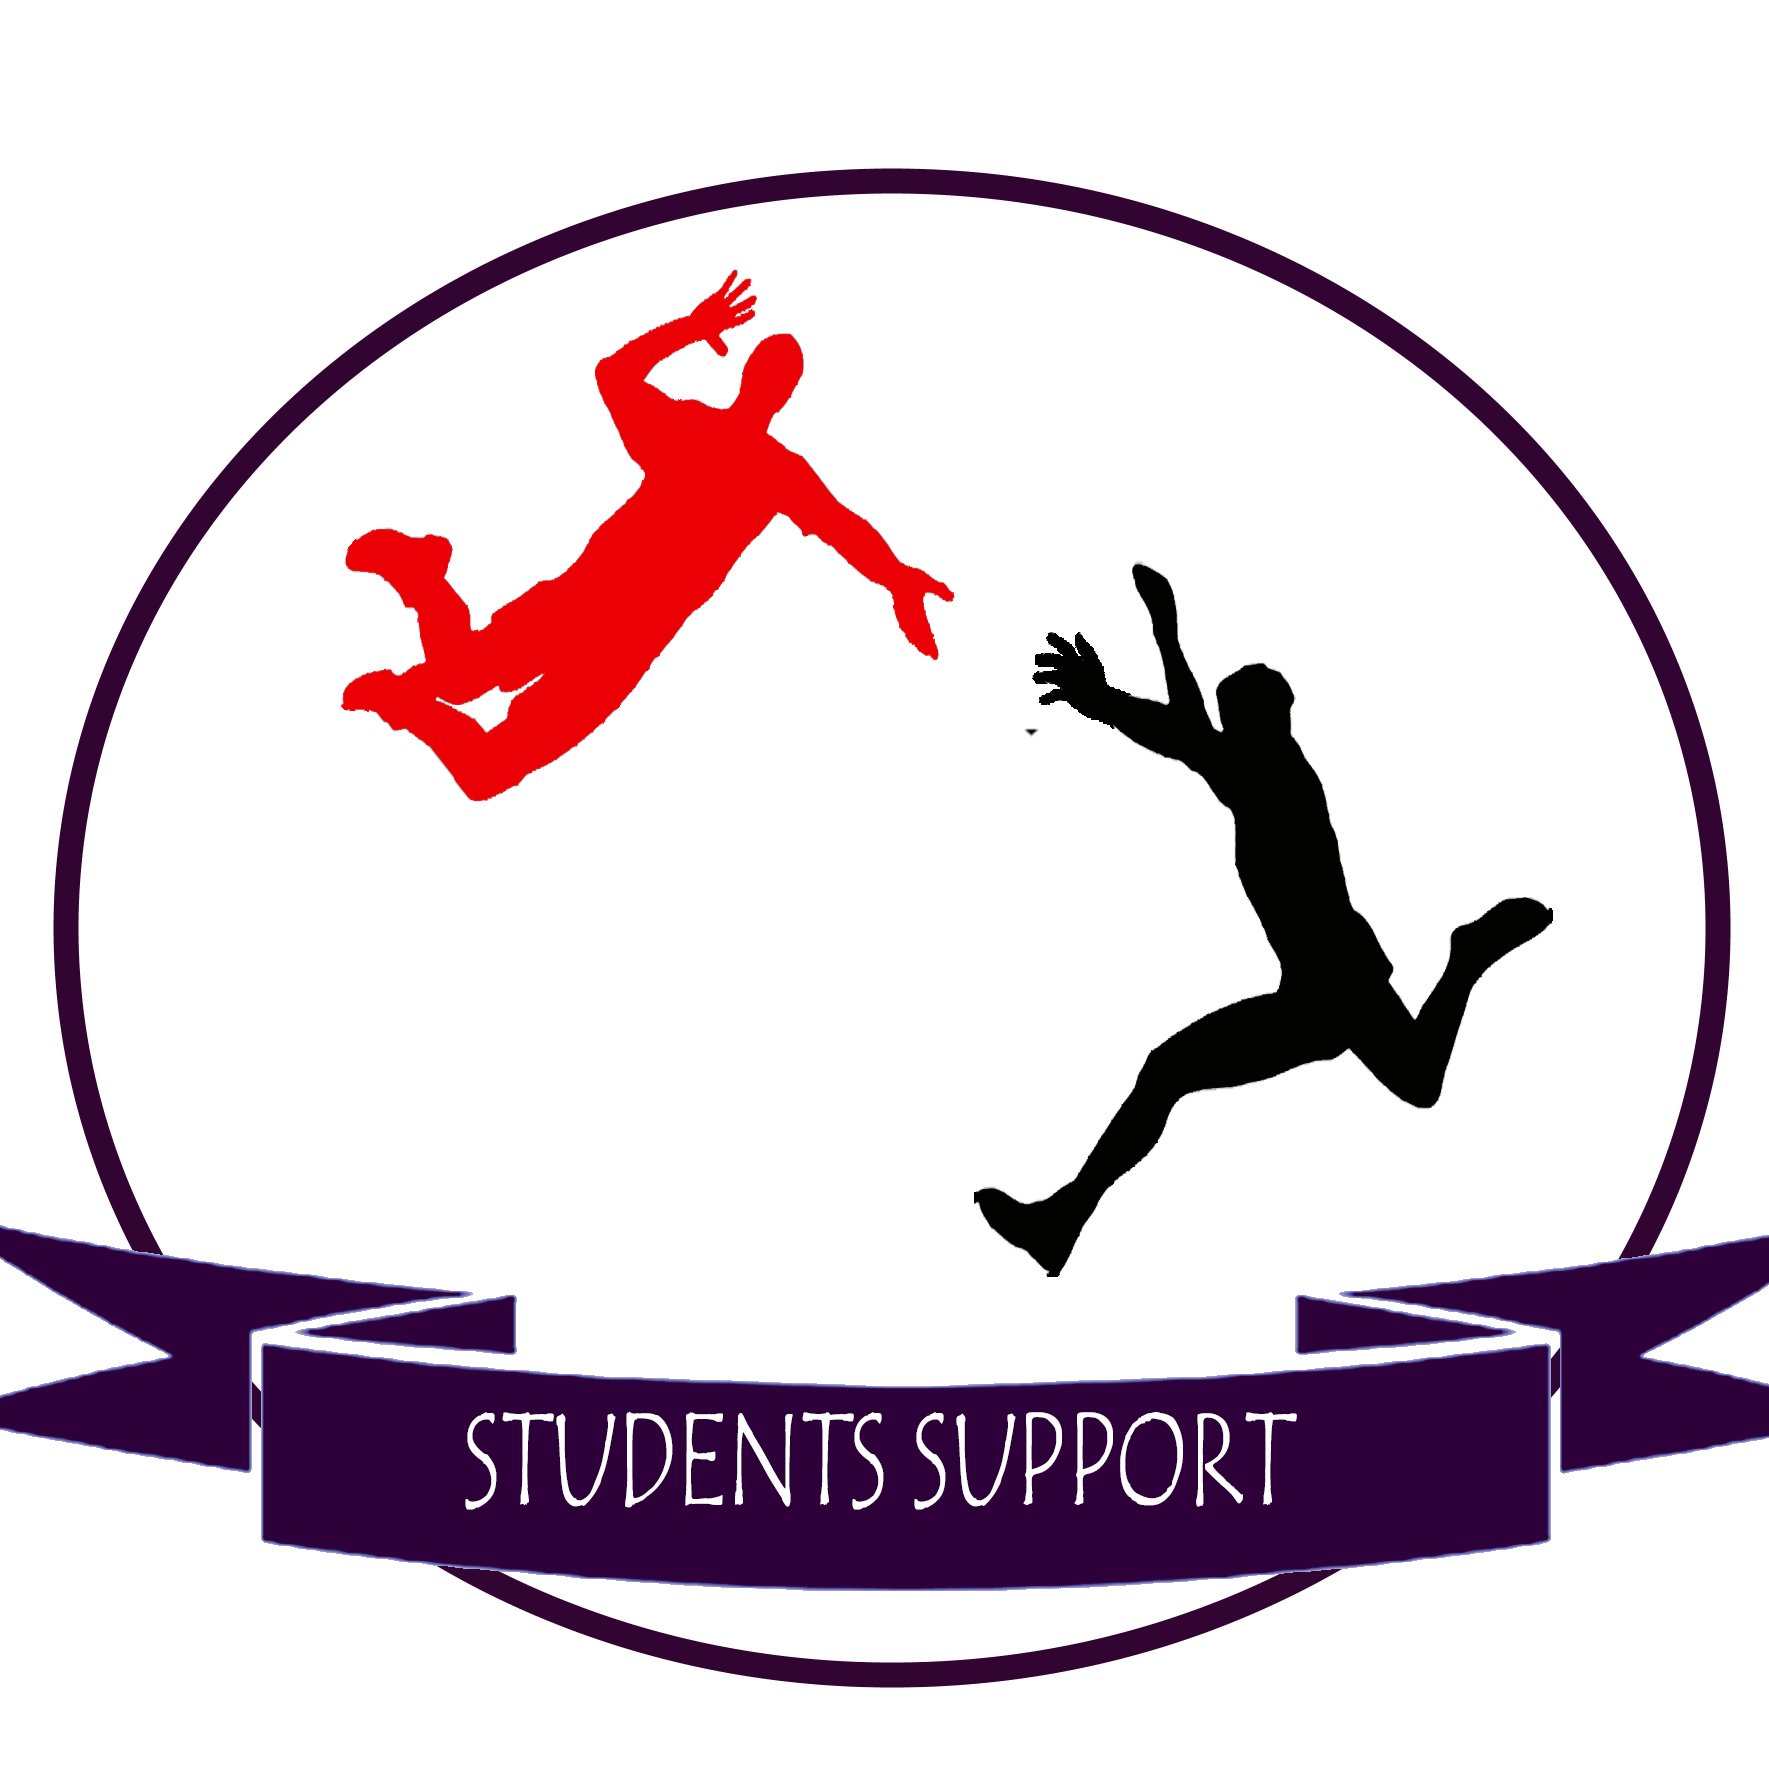 We the students support team try to find out ways to provide information to the students related to books, subjects, interview experience, competitive exams etc